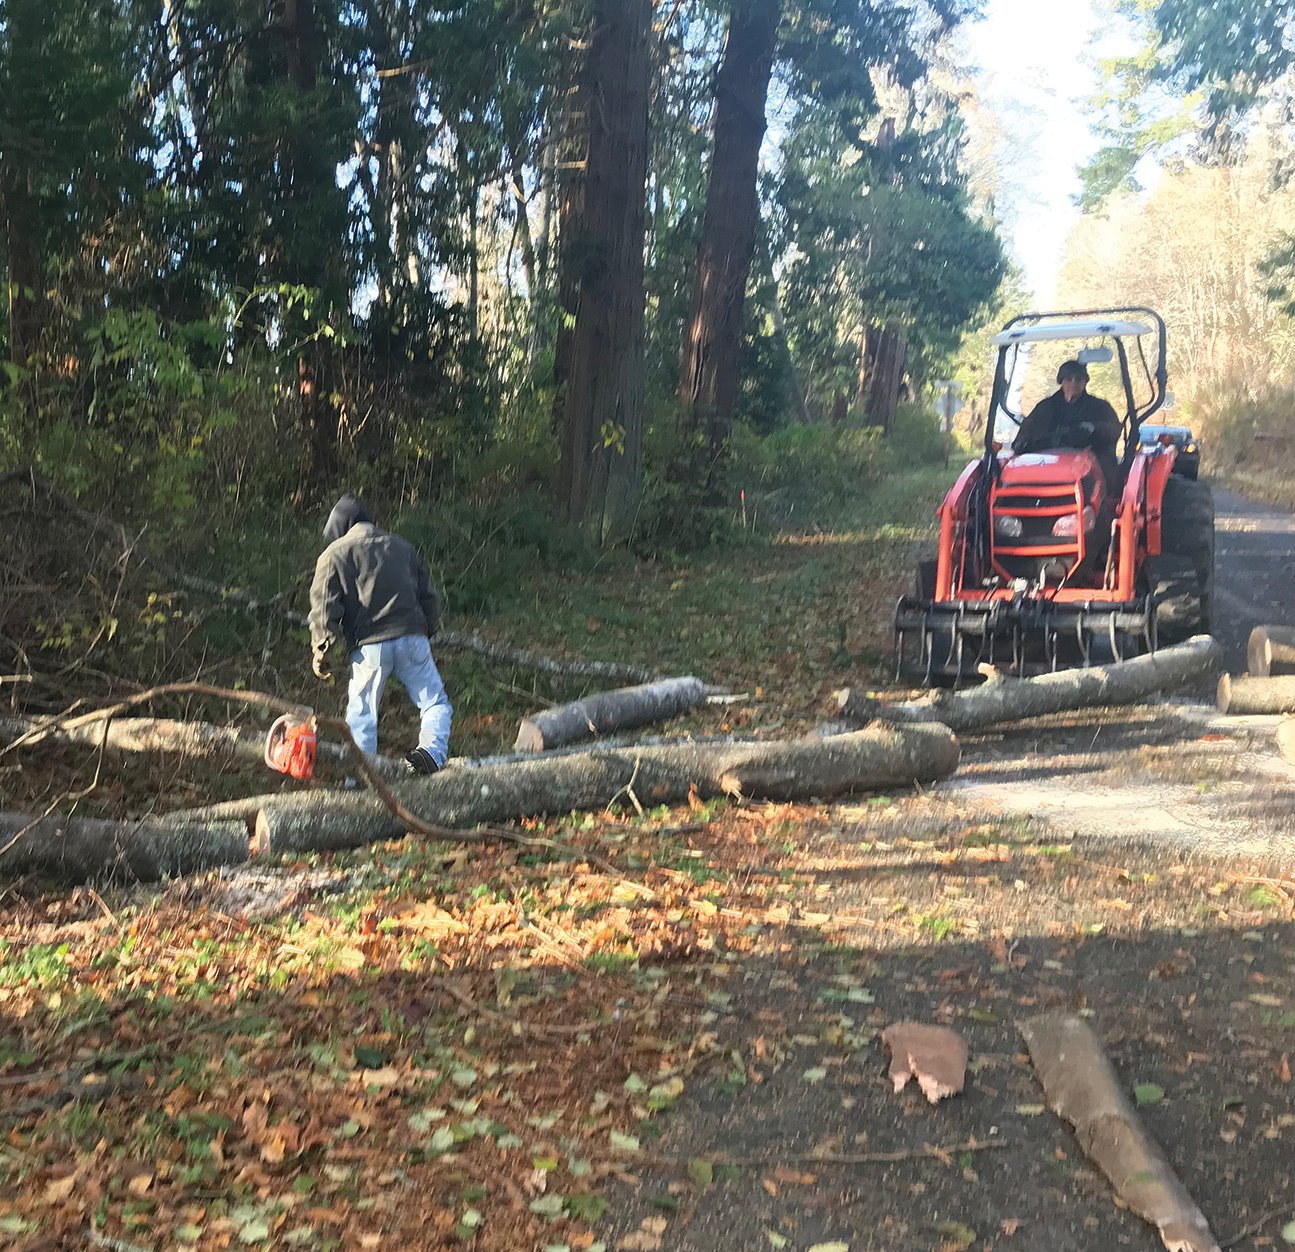 After winds blew down a tree across APA Road, local residents showed up with tools and machinery to re-open the road. Chamber president Brian Calder has been asking the county to create a small works roster to provide fast and cost-effective local response.